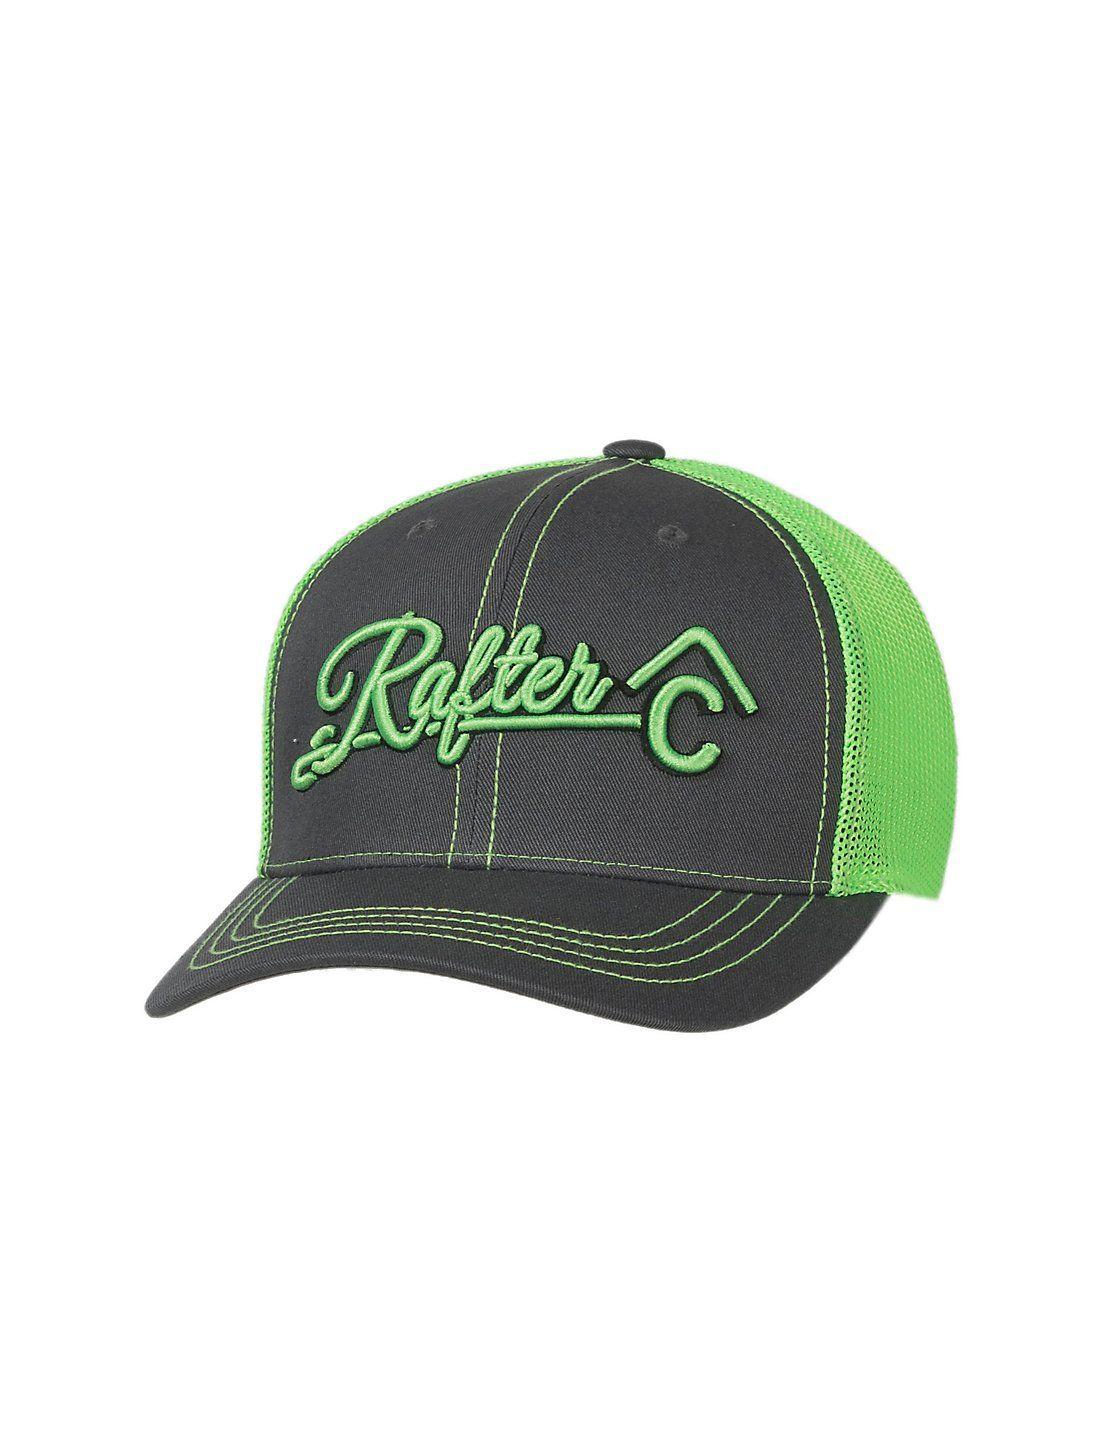 Lime Green C Logo - Rafter C Charcoal with Lime 3D Logo & Mesh Trucker Cap MF1547226 ...